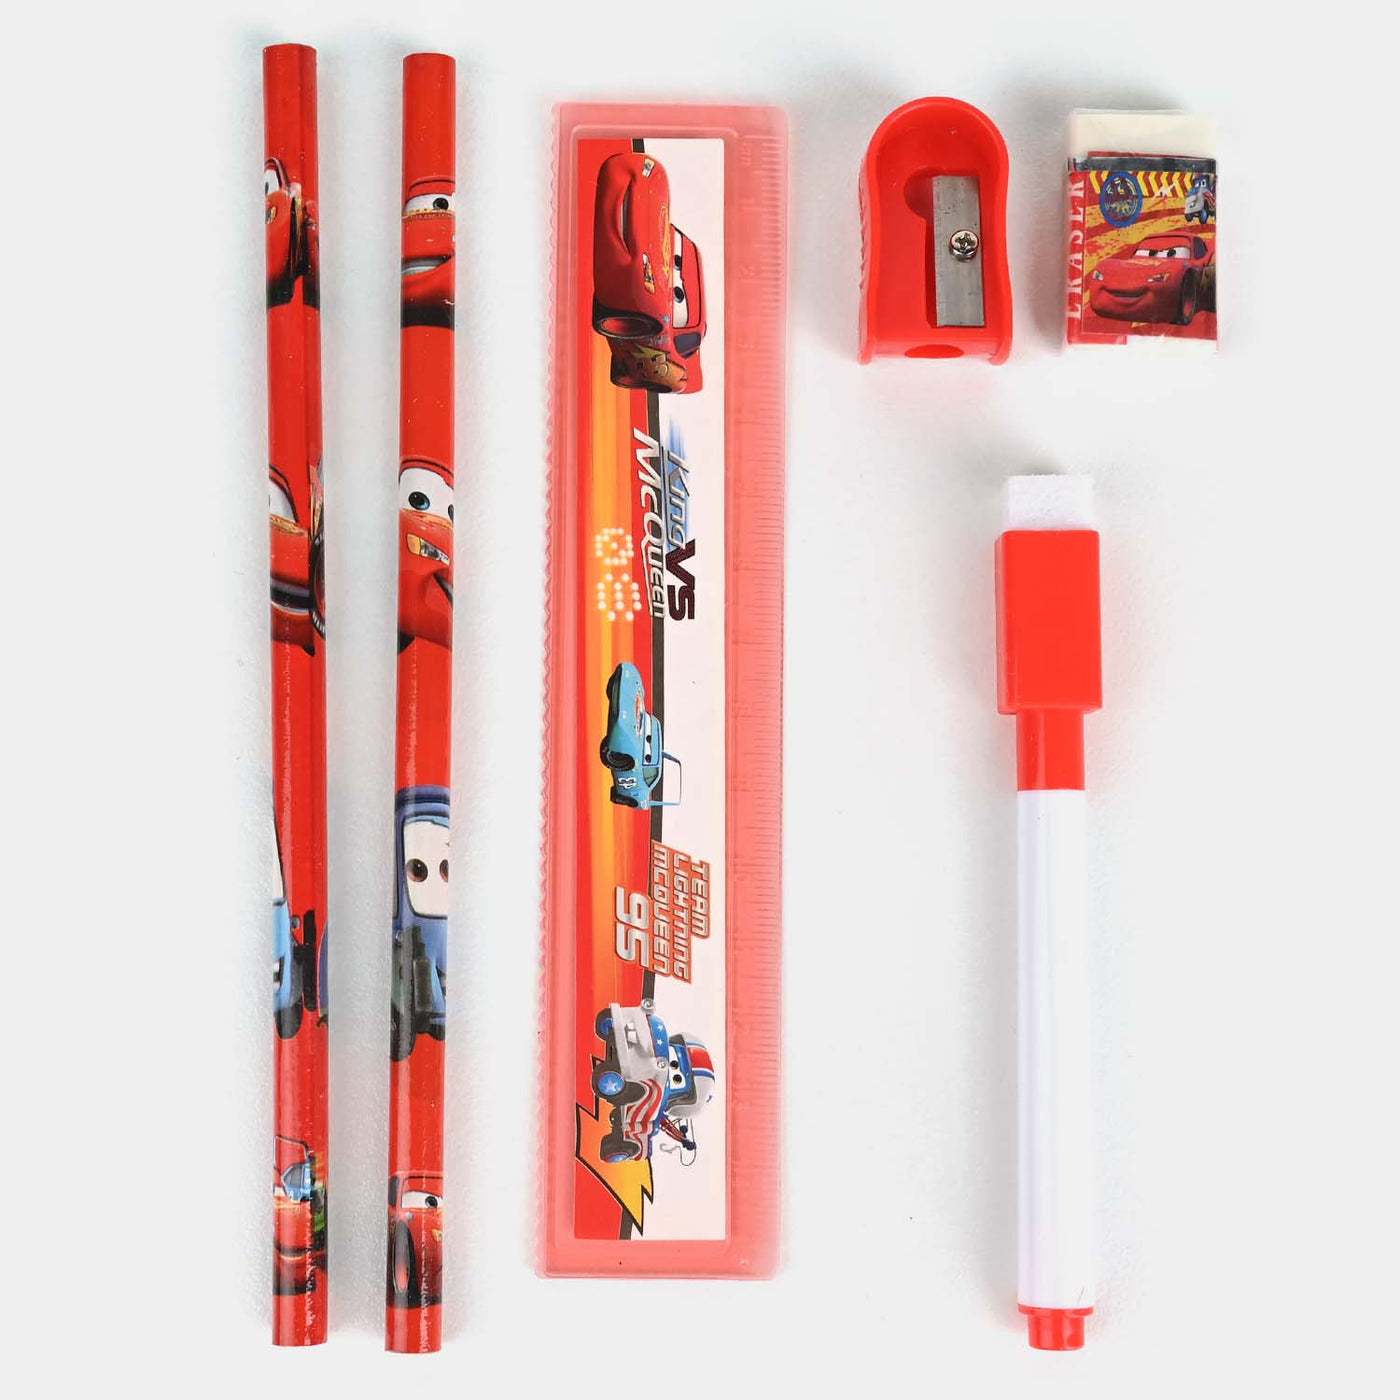 Stationery Set With Box For Kids